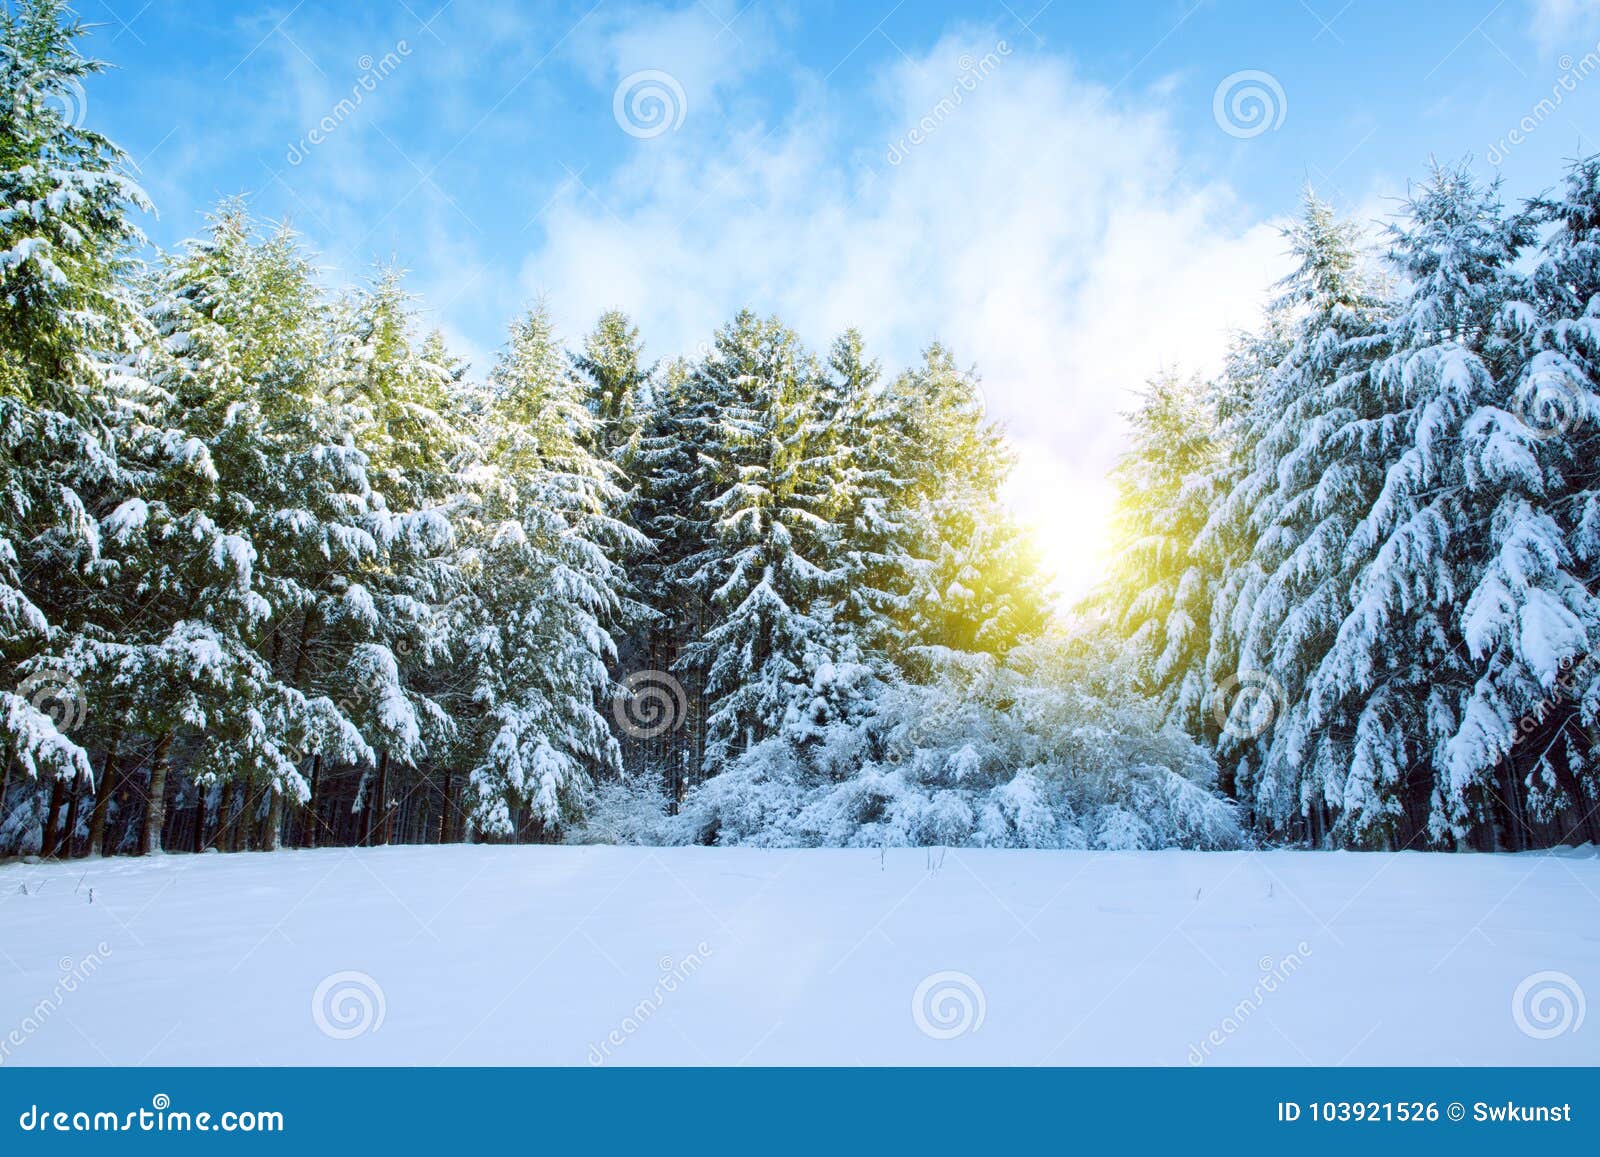 Download Sunset In The Winter Forest Stock Image of road light